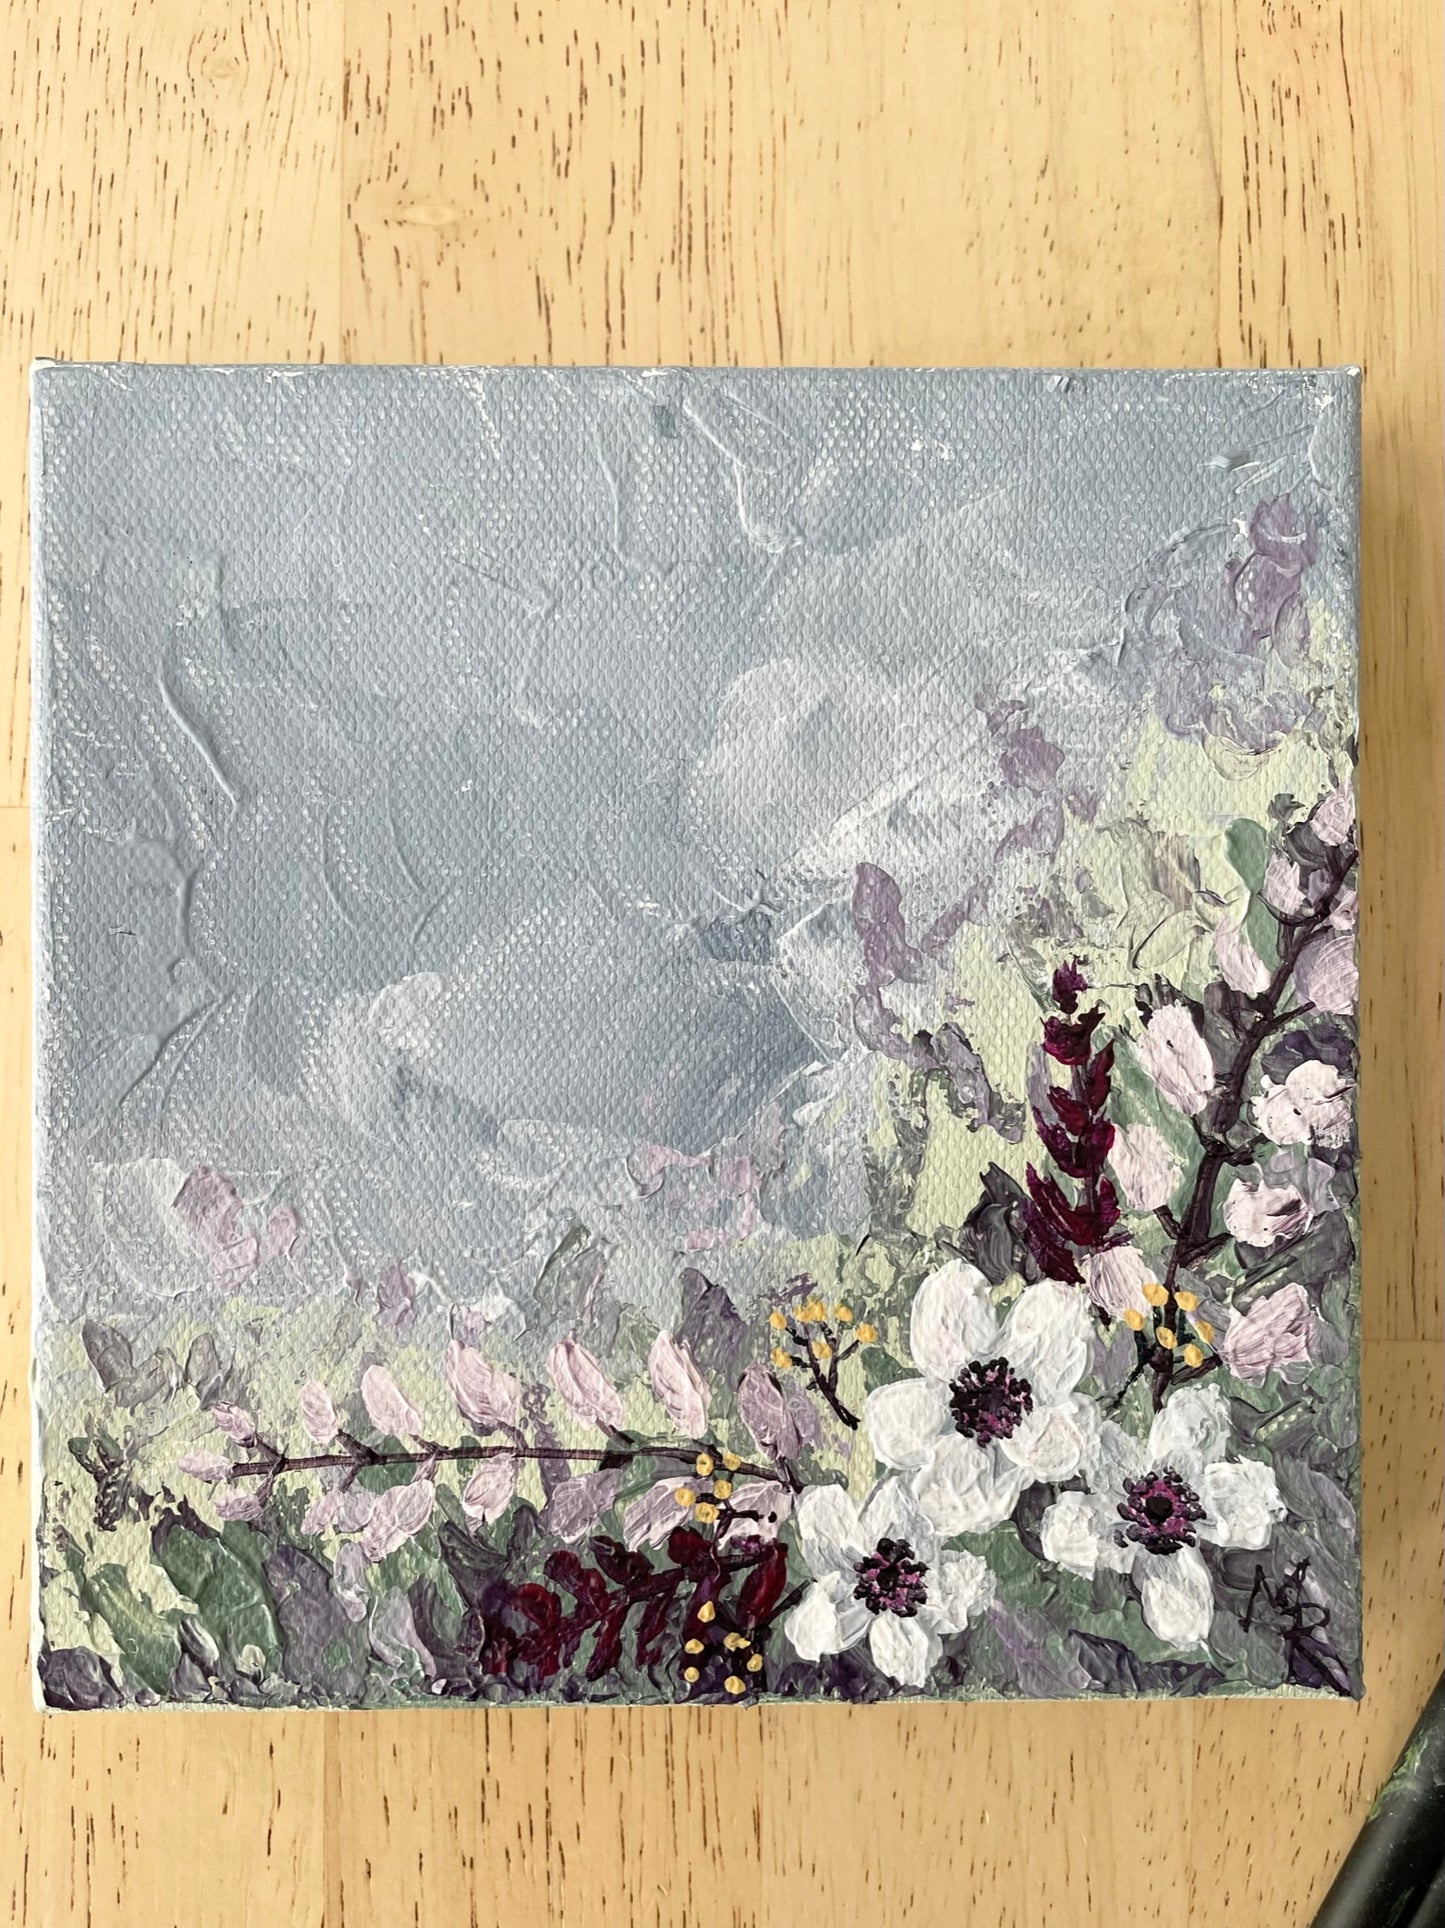 "Spring is in the Air" acrylic painting